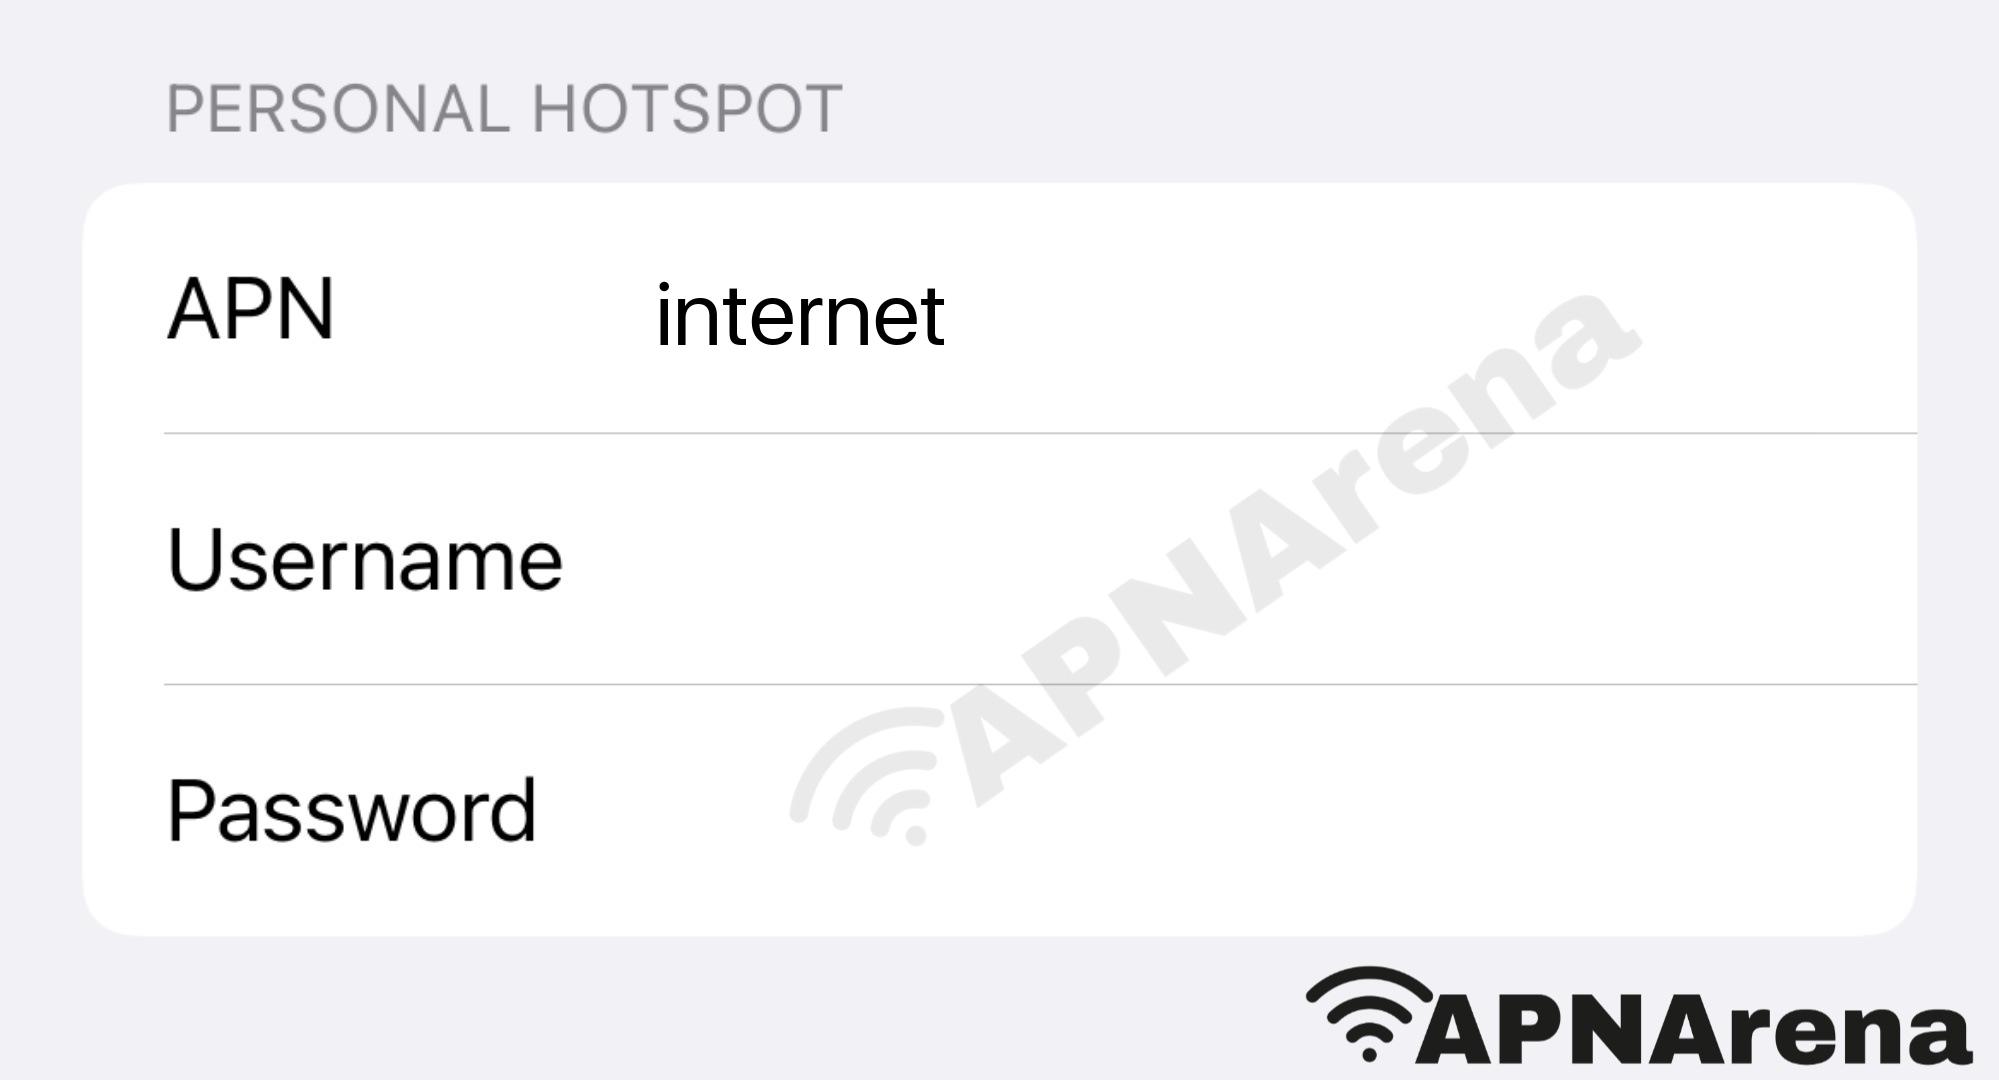 BASE Personal Hotspot Settings for iPhone